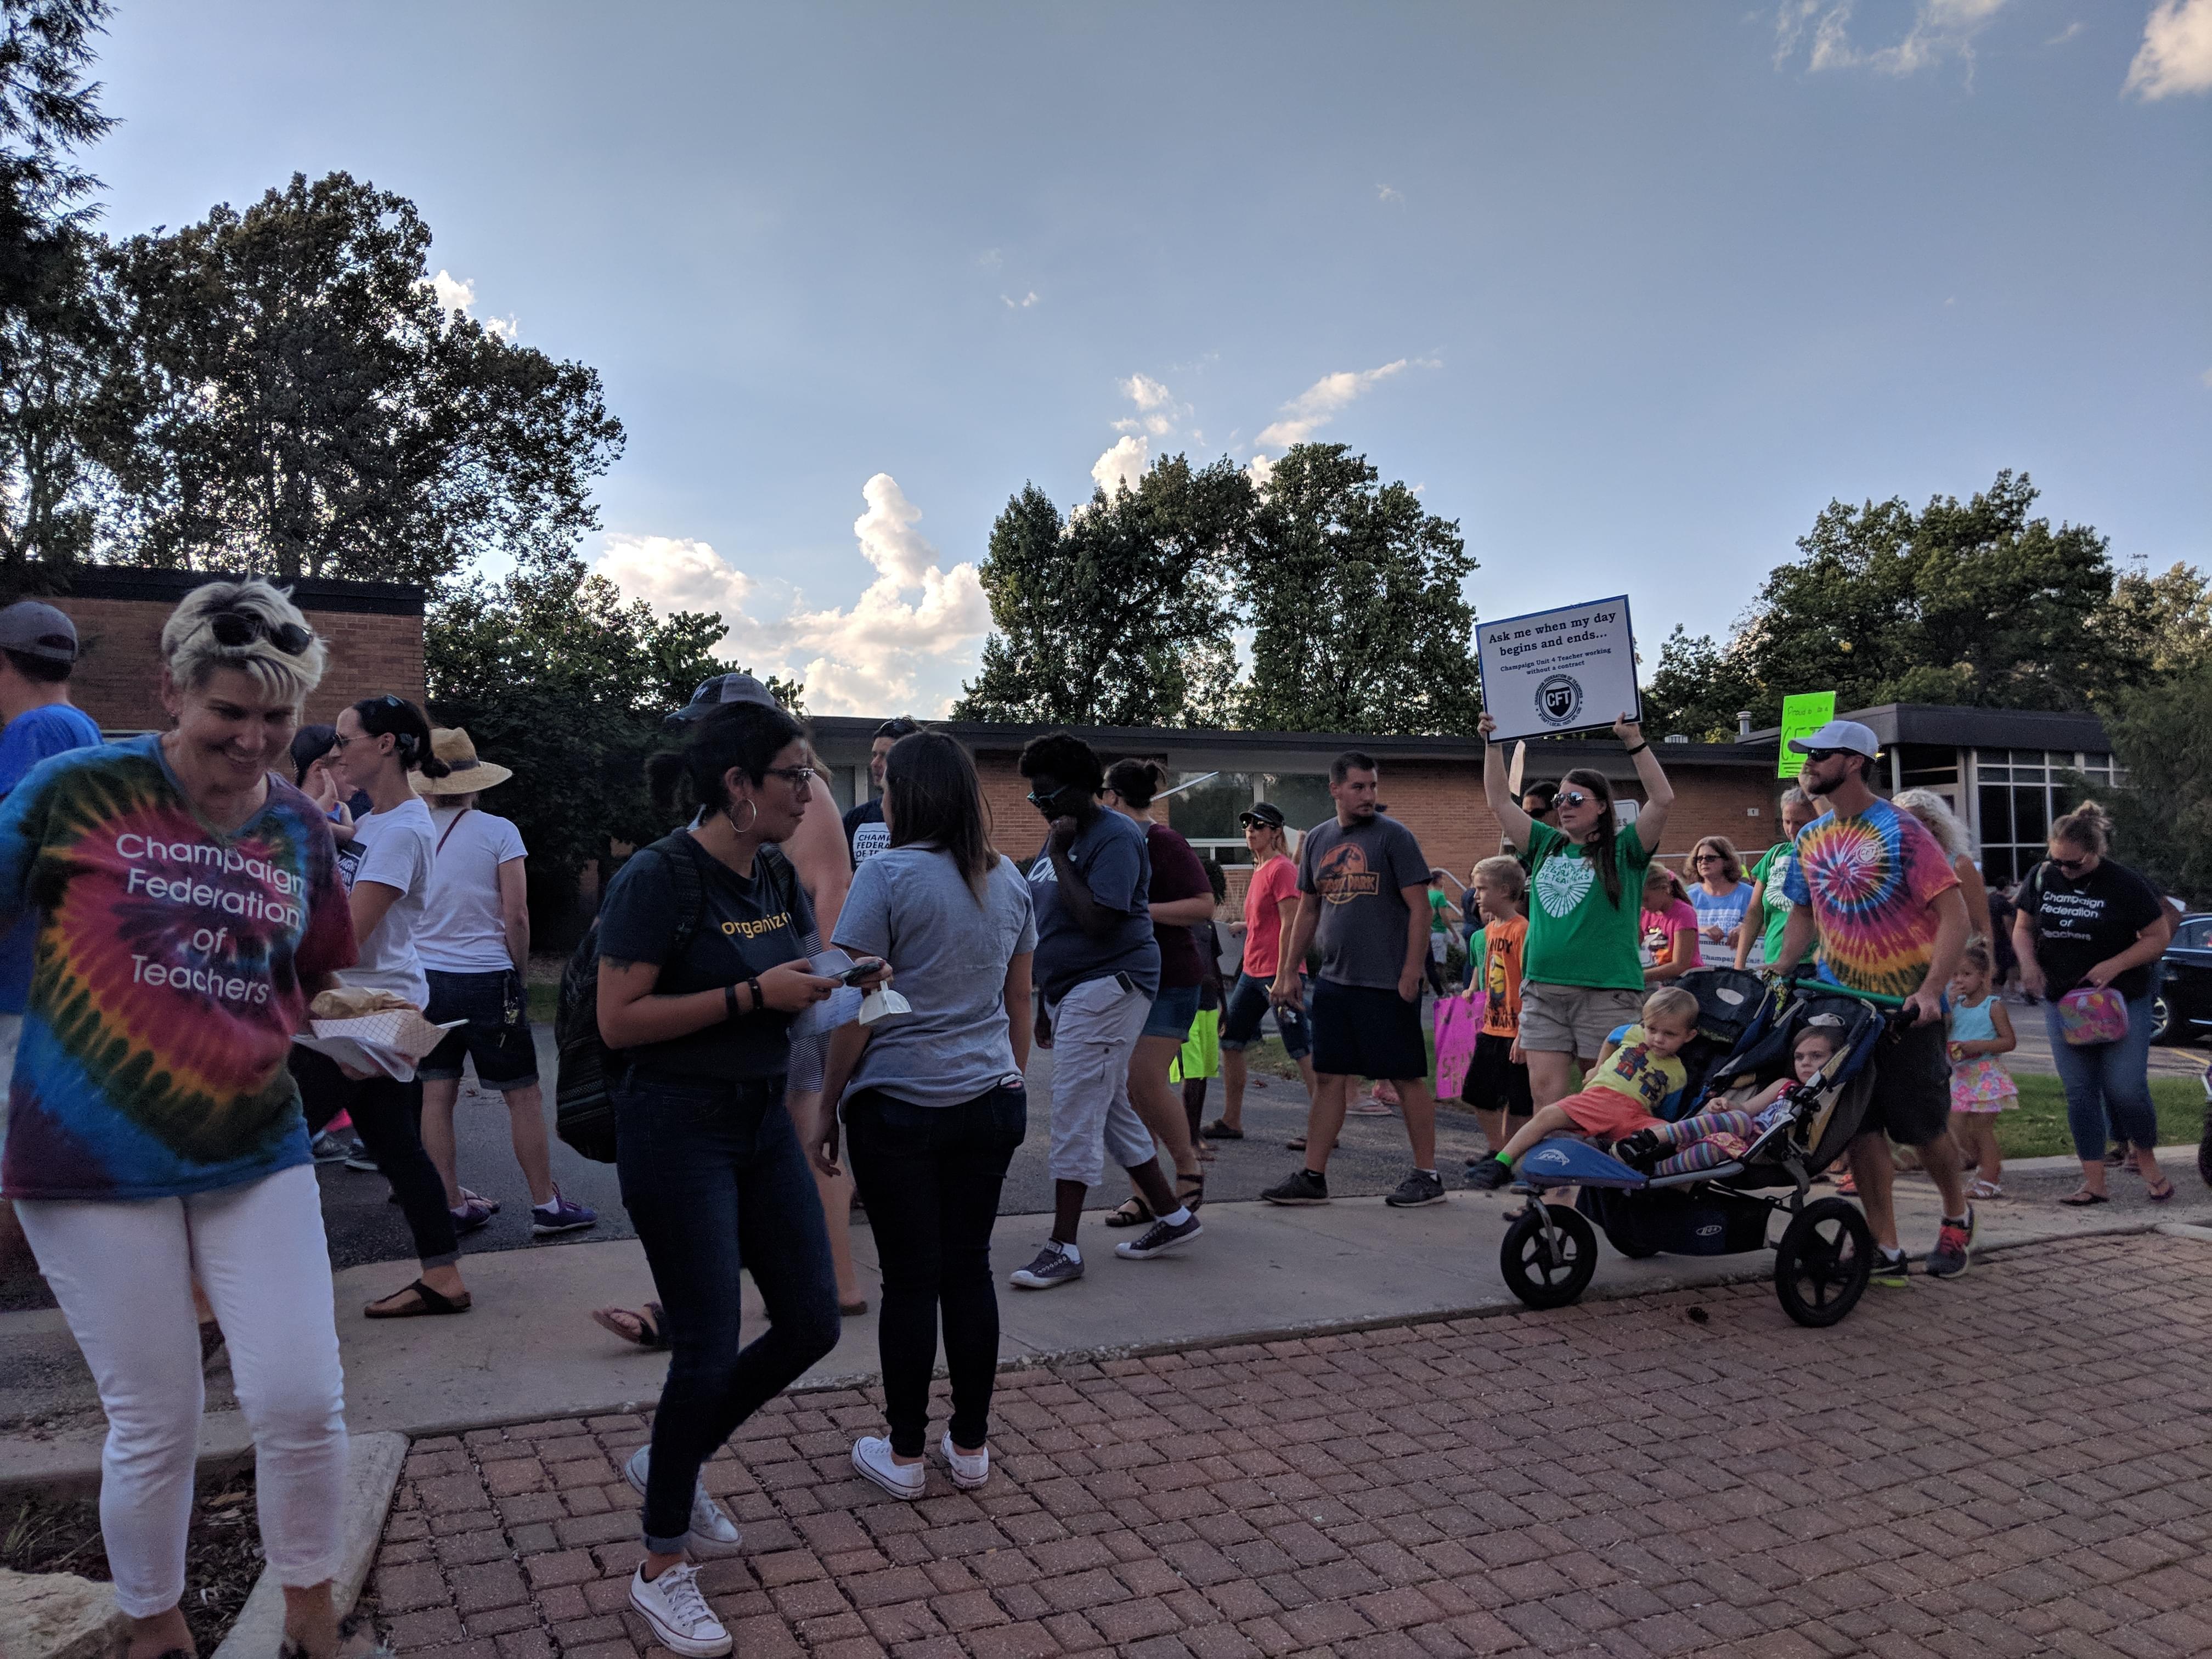 Roughly 200 teachers, as well as children and union supporters rallied outside the Champaign Unit 4 administration building on Monday, Oct. 8, 2018.